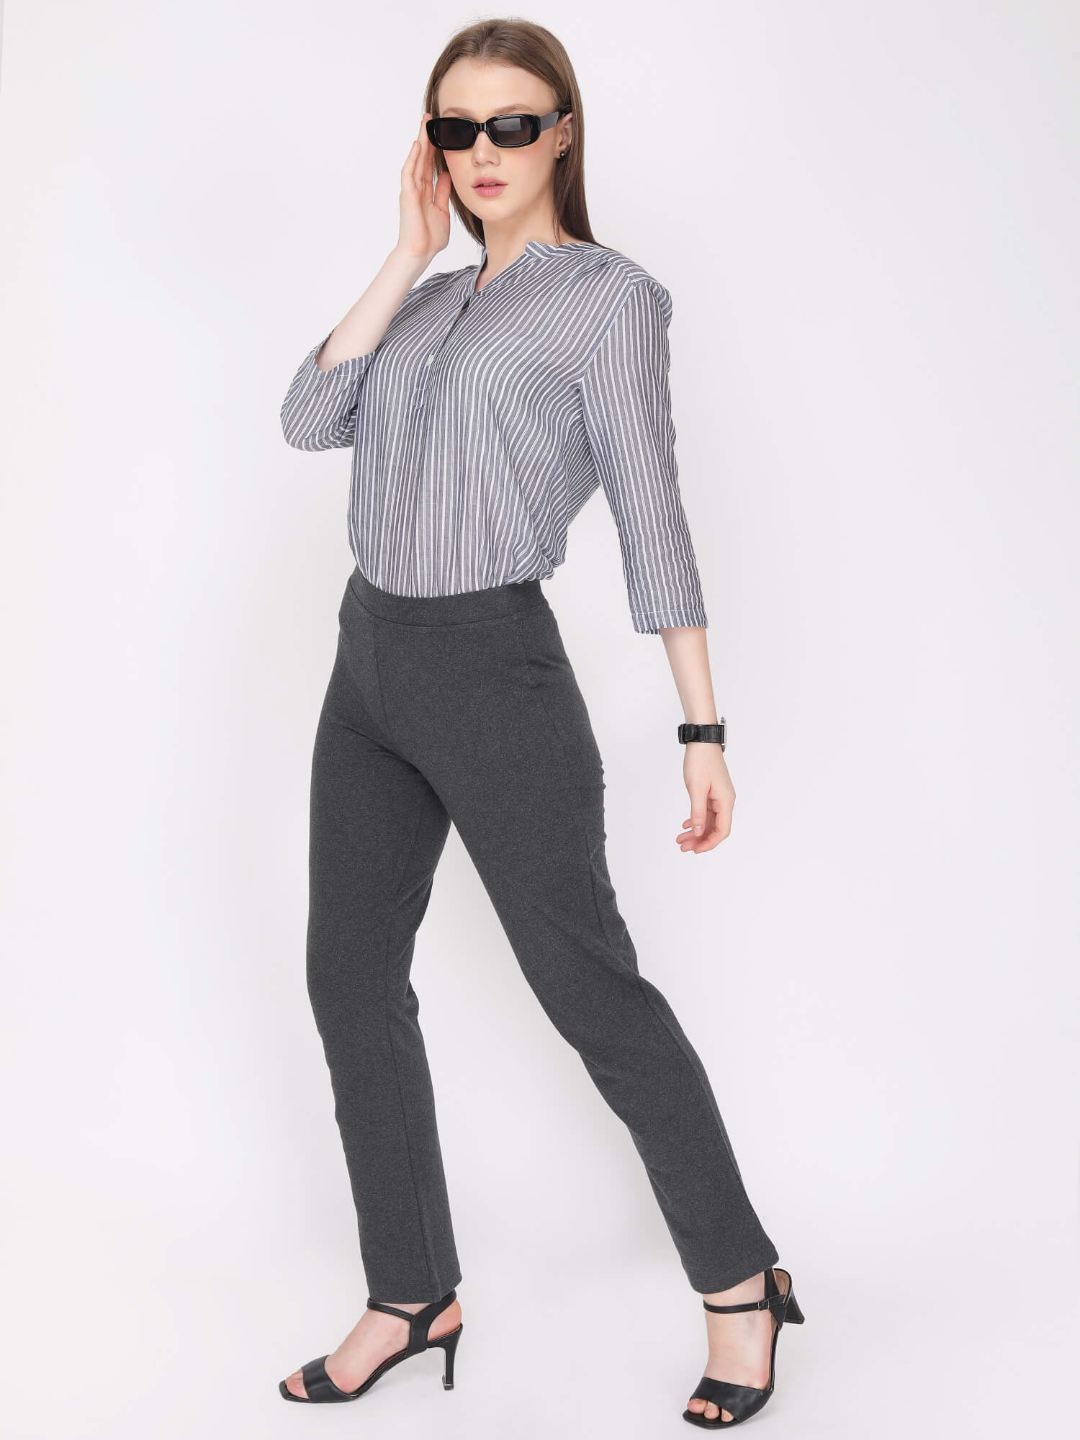 ZYSWP Grey Suit Pants for Women Spring Autumn High Waist Slim Casual  Trousers for Work Formal Wear Vertical Straight Trousers (Color : Grey,  Size : 4XL code) : Amazon.de: Fashion